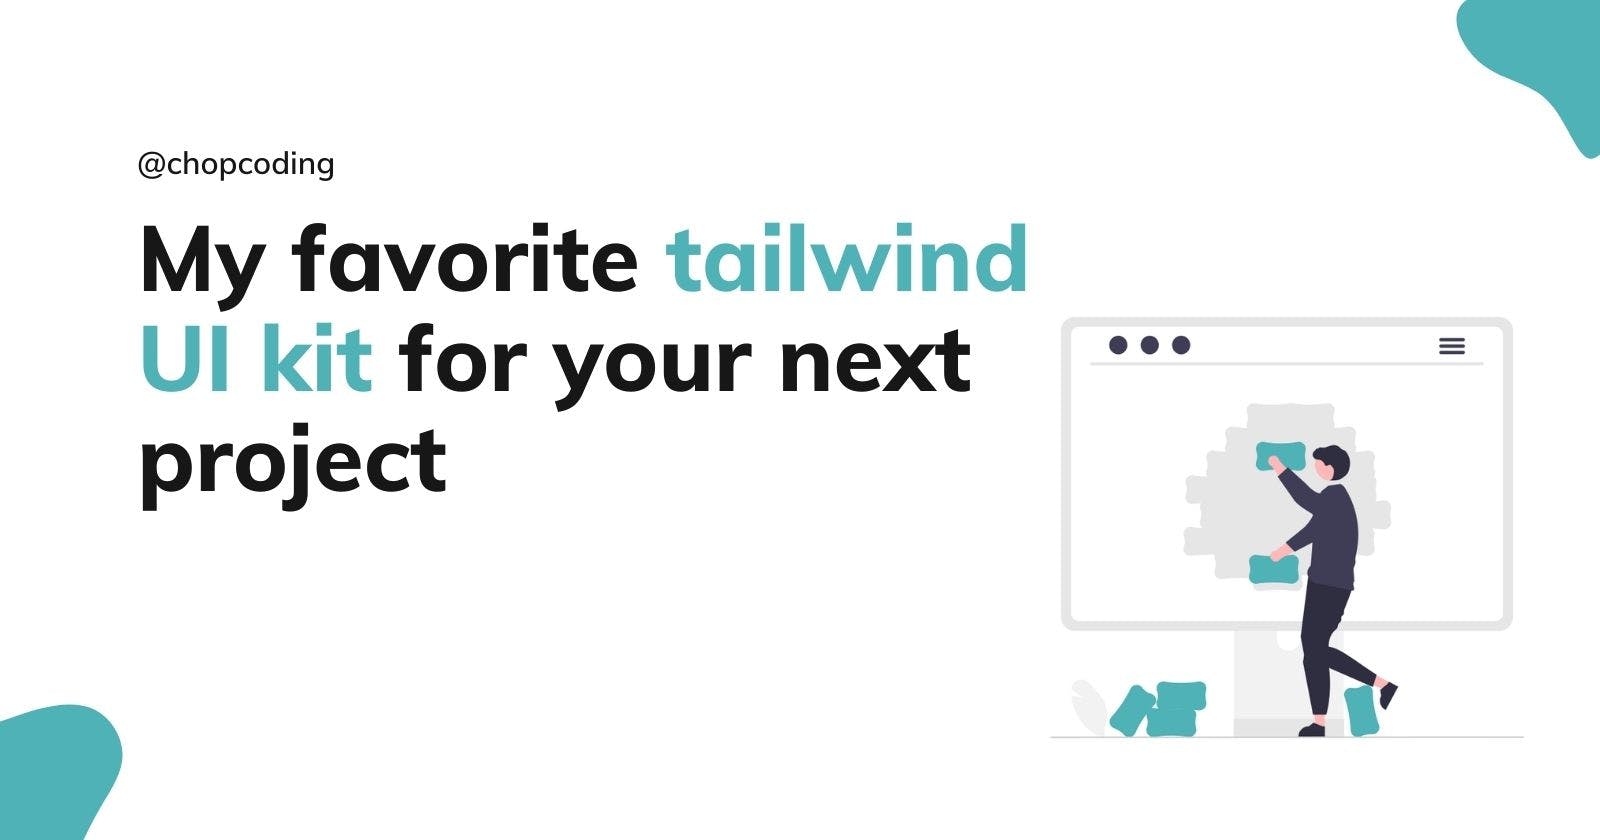 My favorite tailwind UI kit for your next project